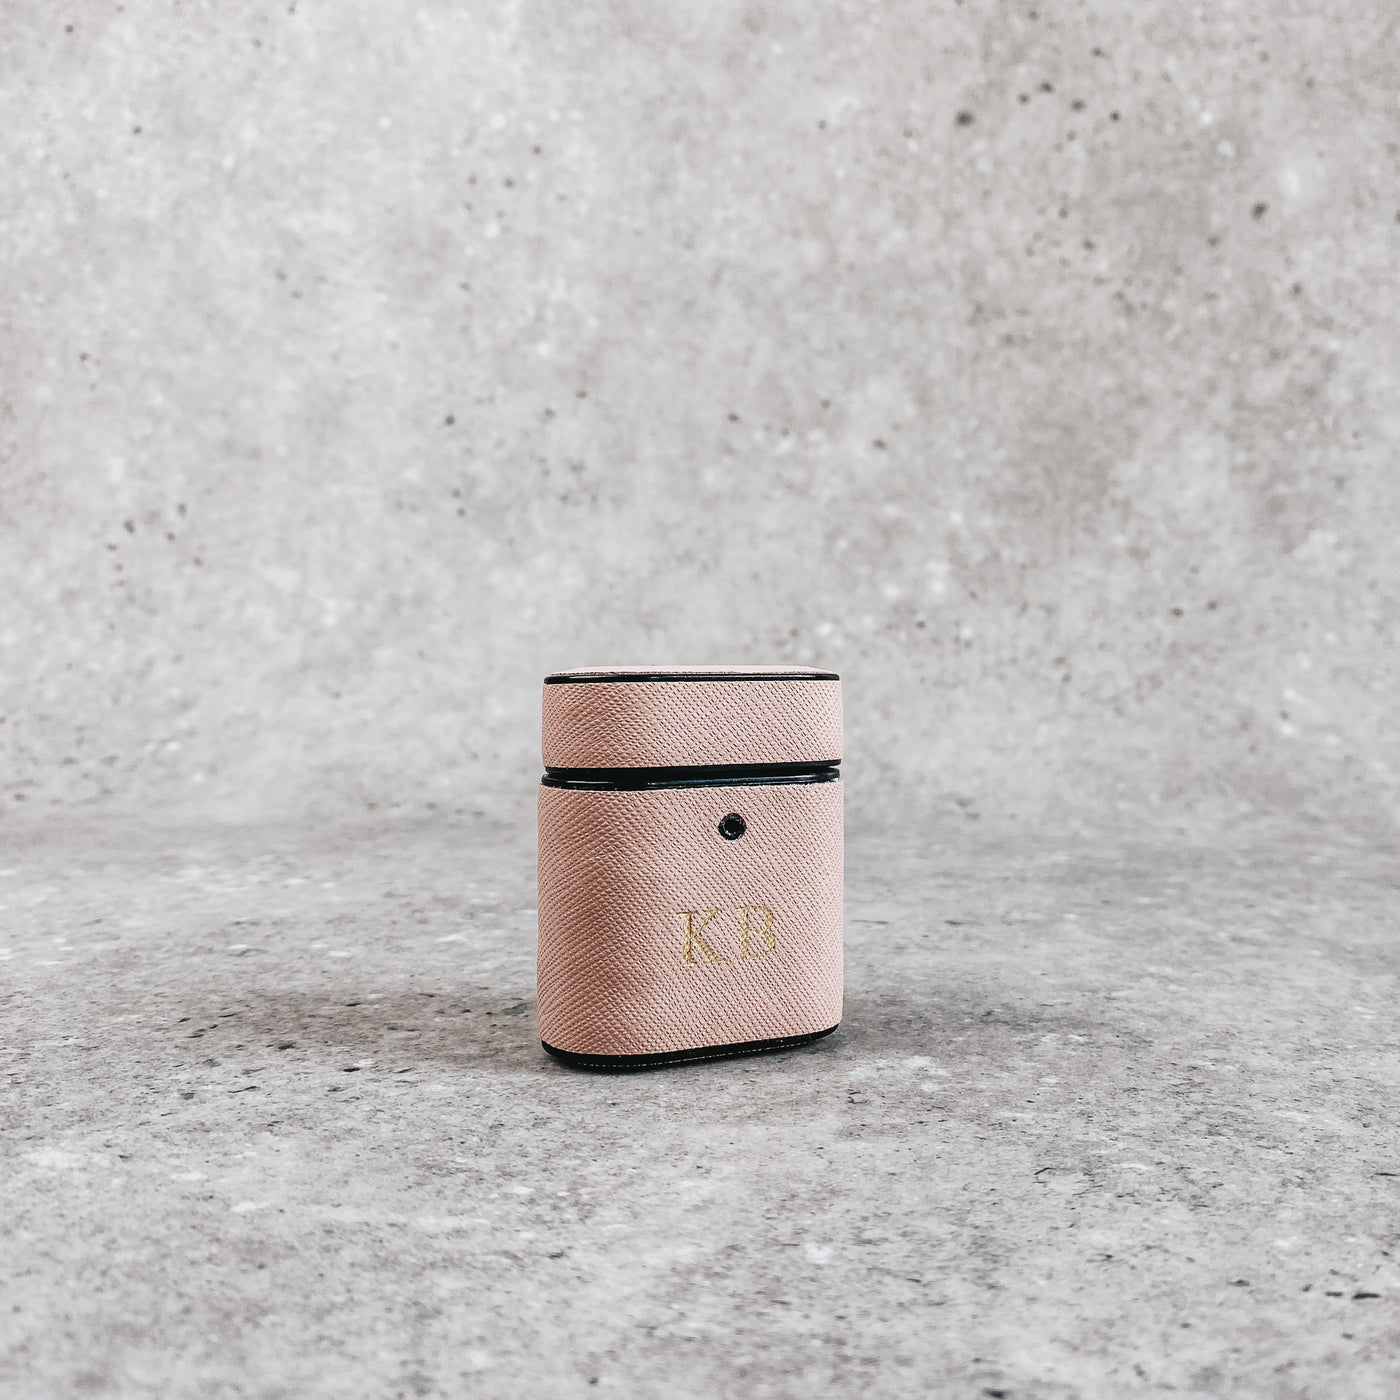 Pink AirPod holder, embossed with gold initials